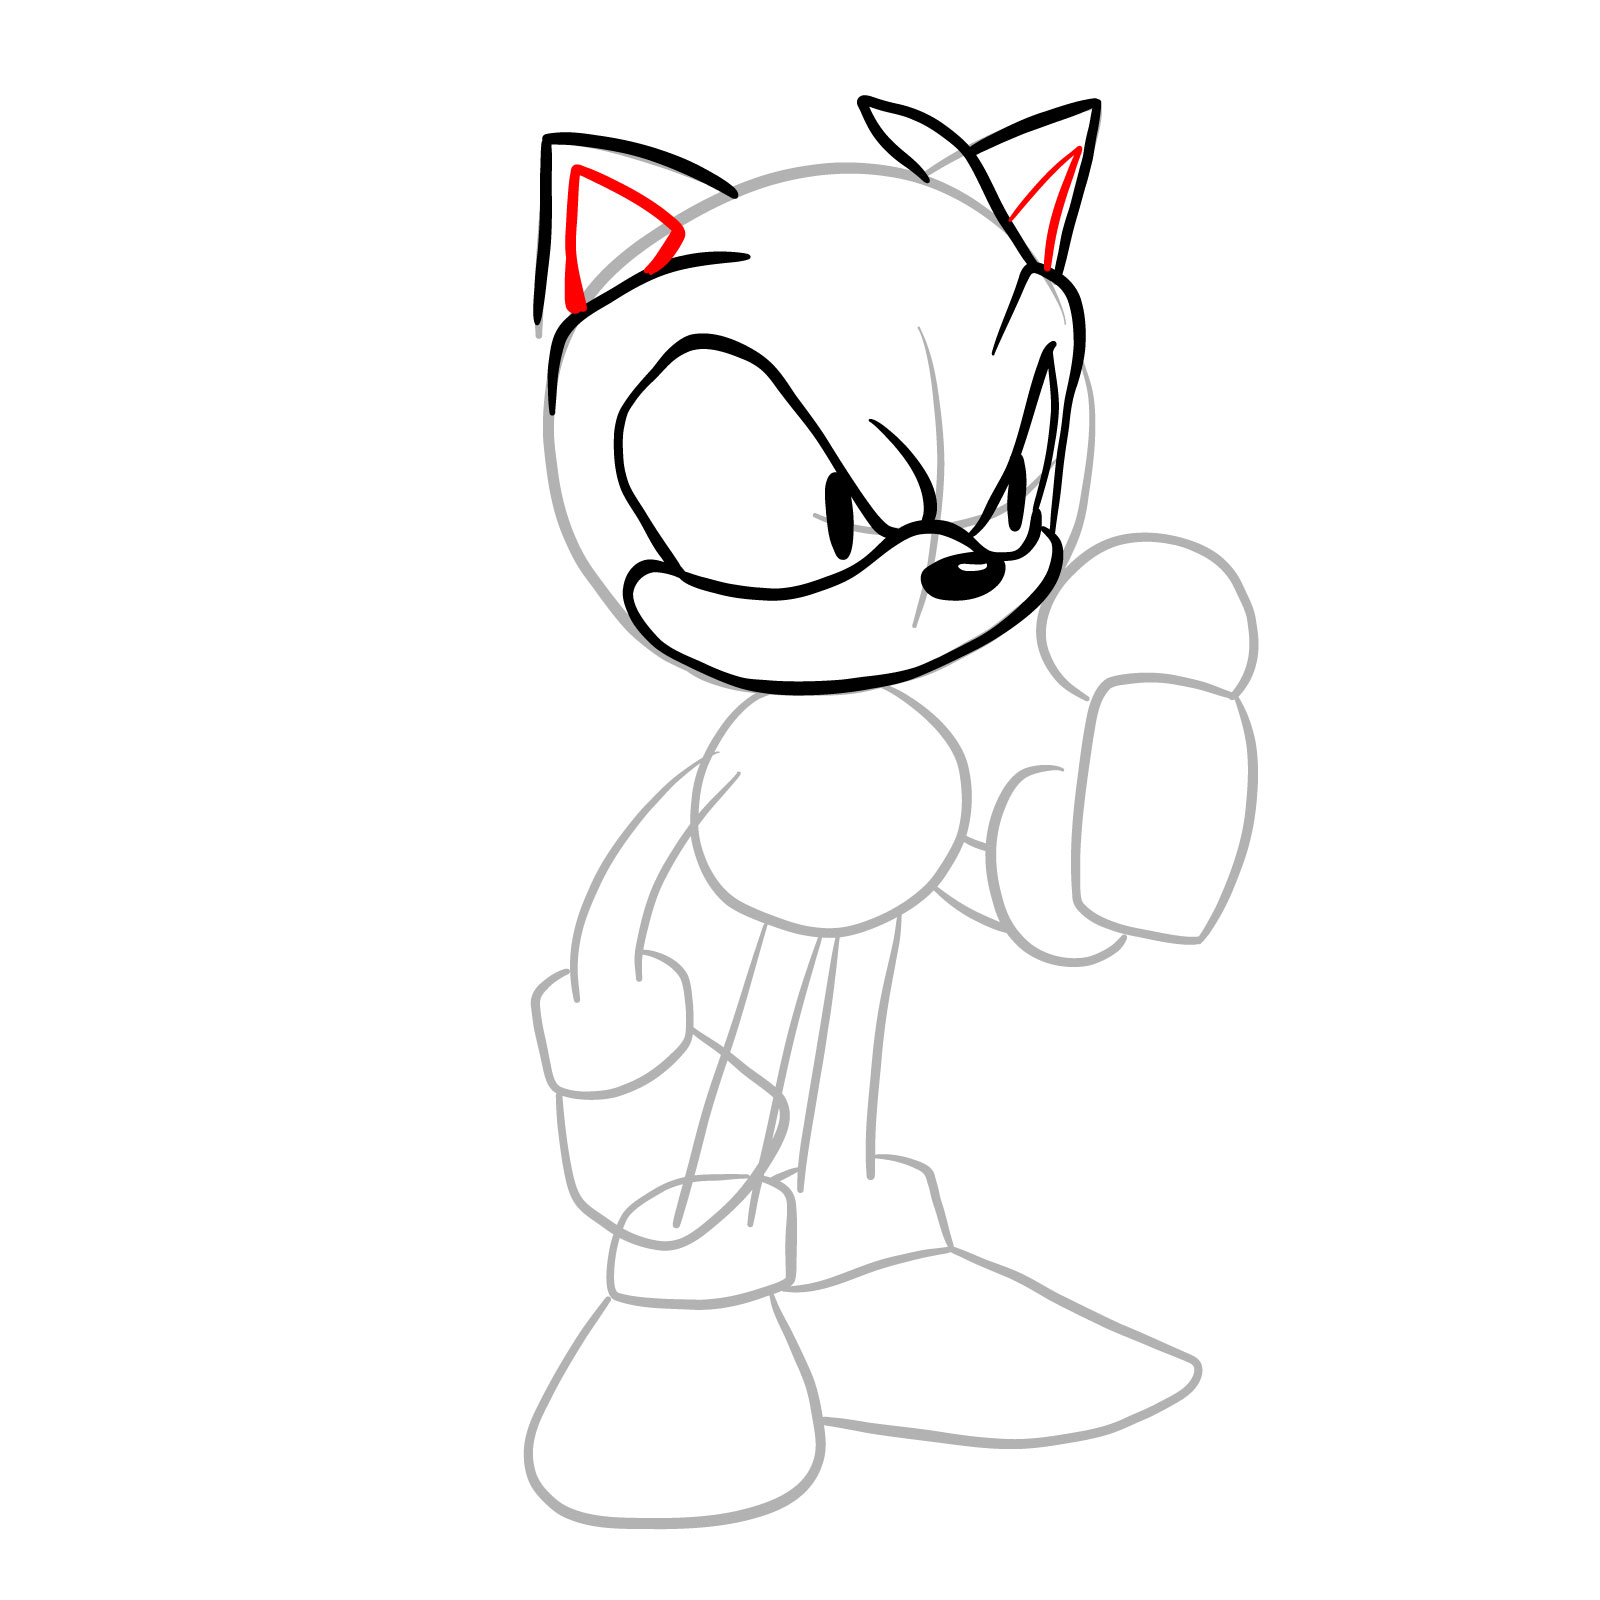 How to draw EXE (Faker Sonic) - step 10